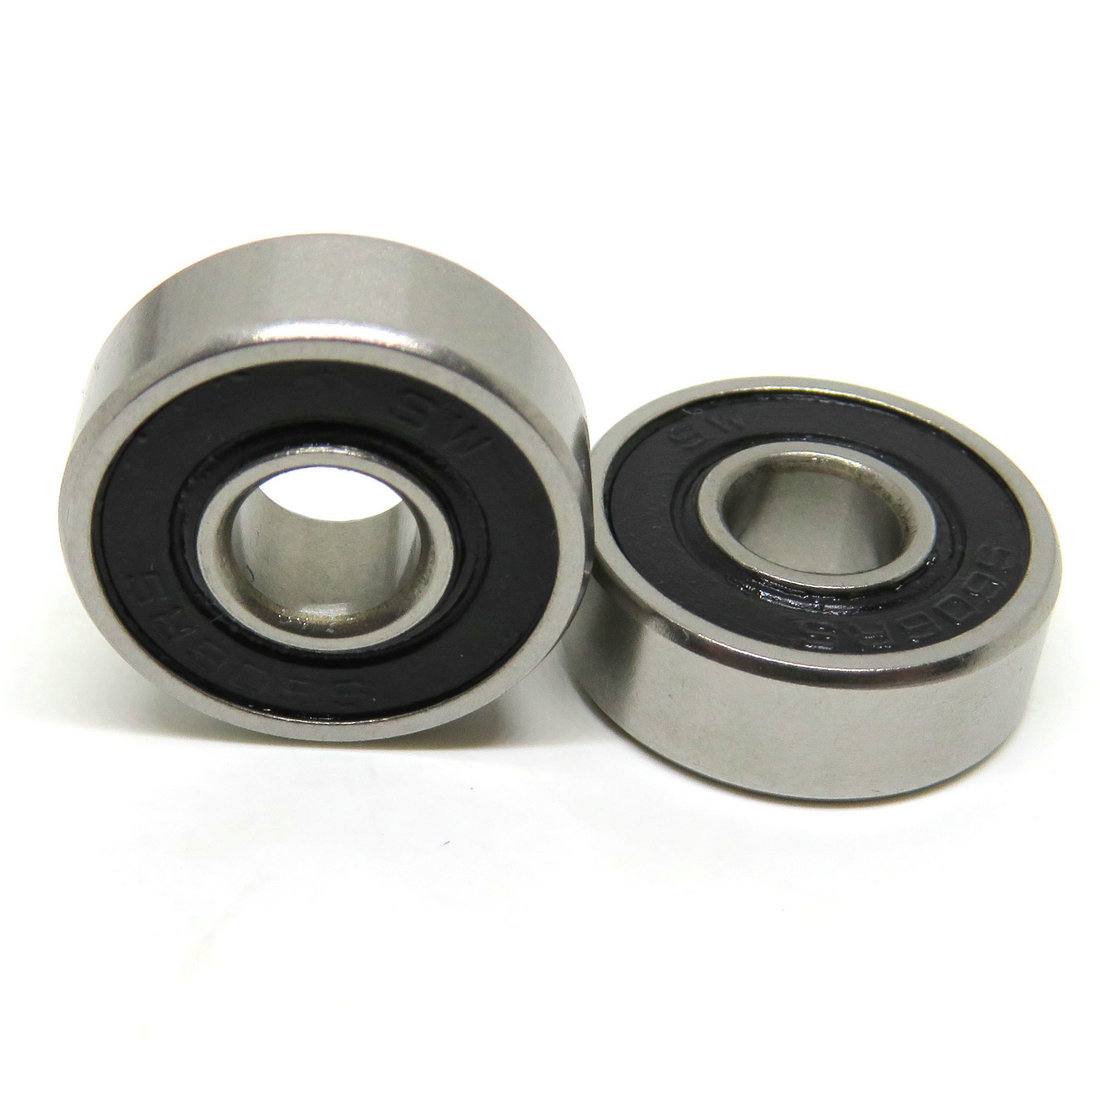 Power Transmission Products S605RS 6x17x7mm Rubber Sealed Stainless Steel Ball Bearing S605 2RS